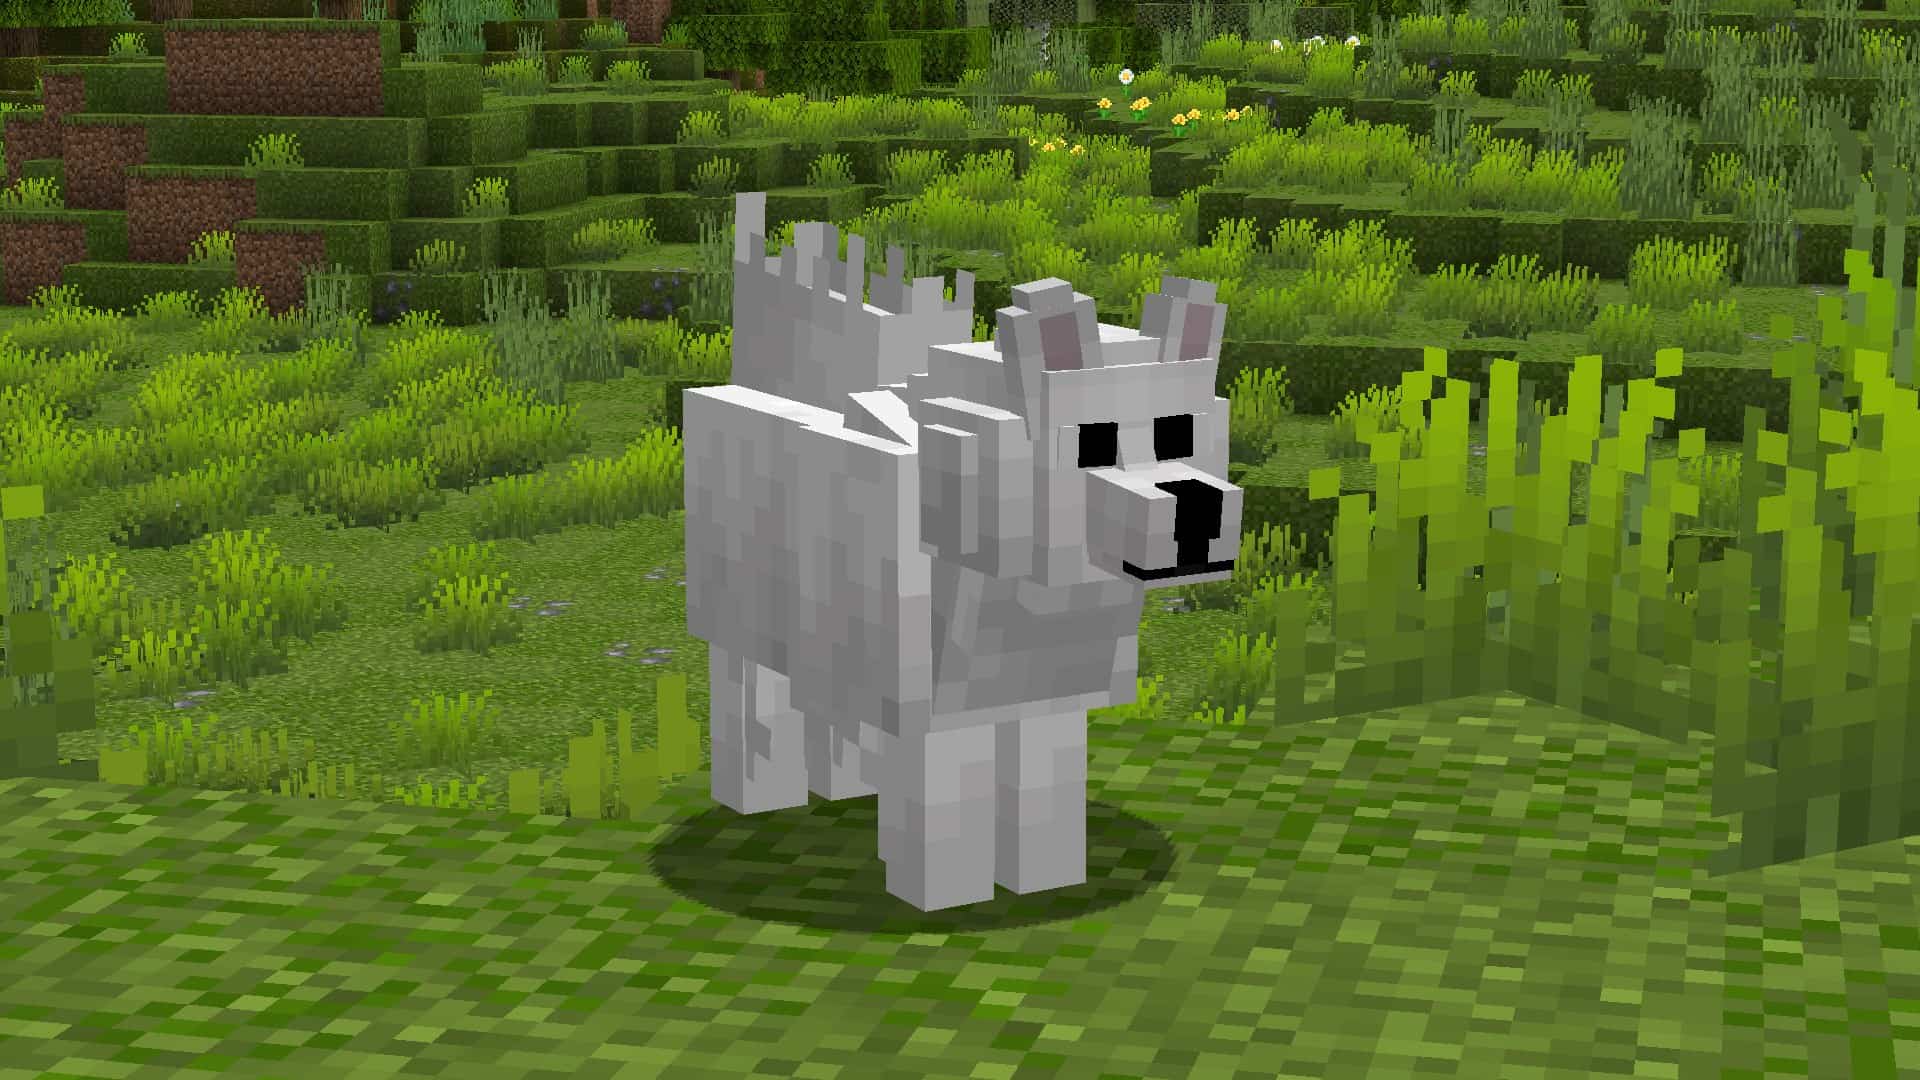 Another Better Wolves Minecraft Texture Pack